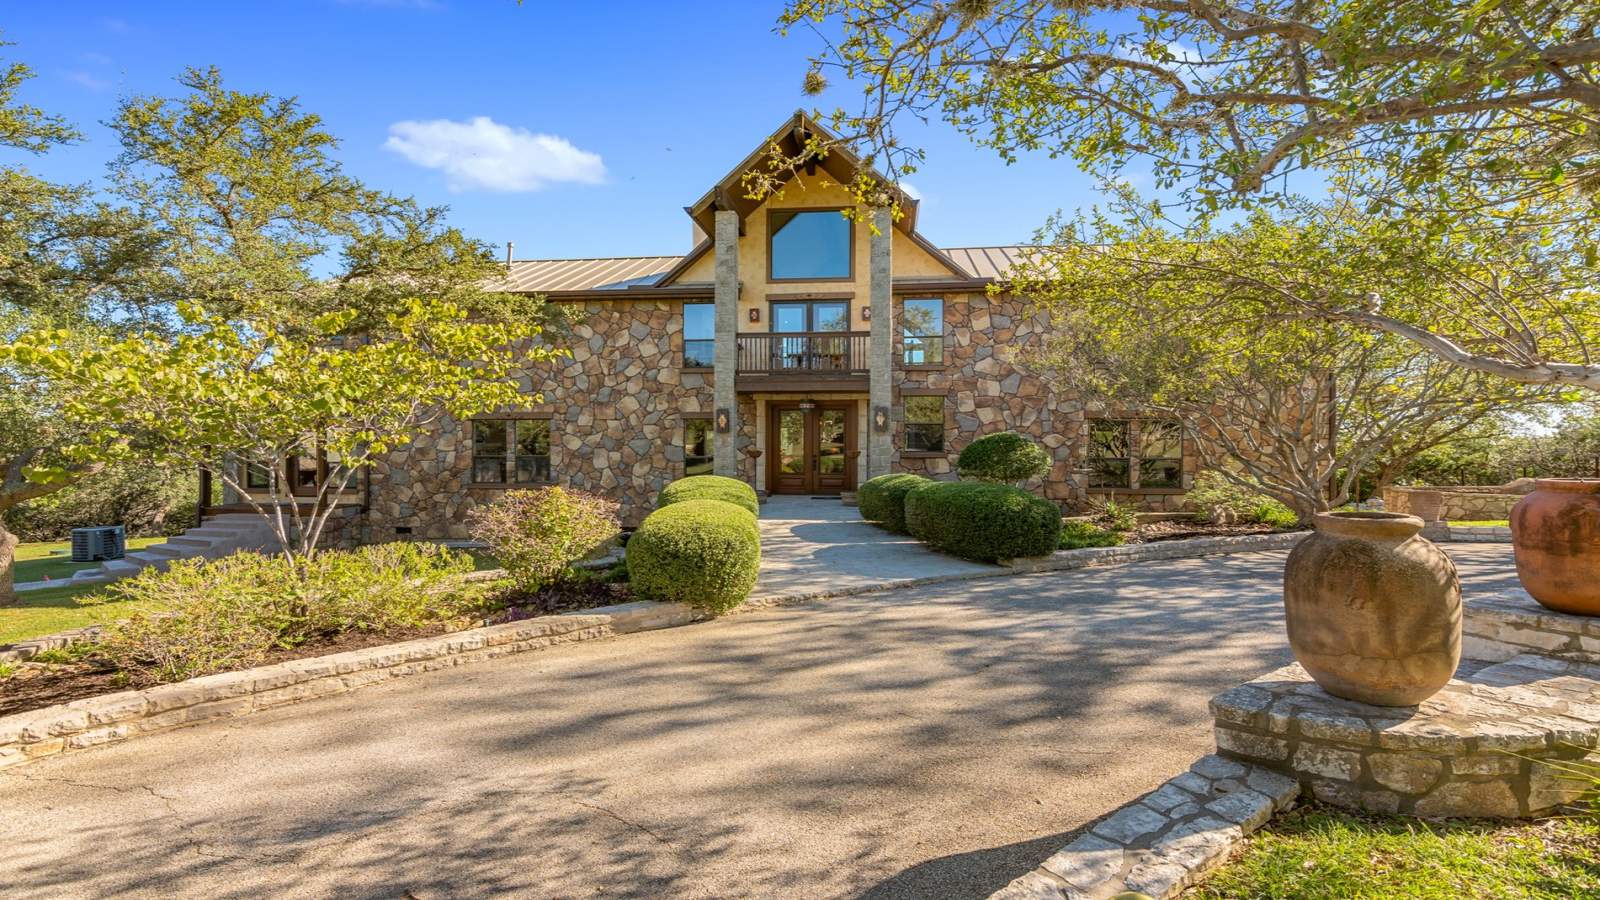 Check out this million-dollar home on 10 acres for sale in San Antonio